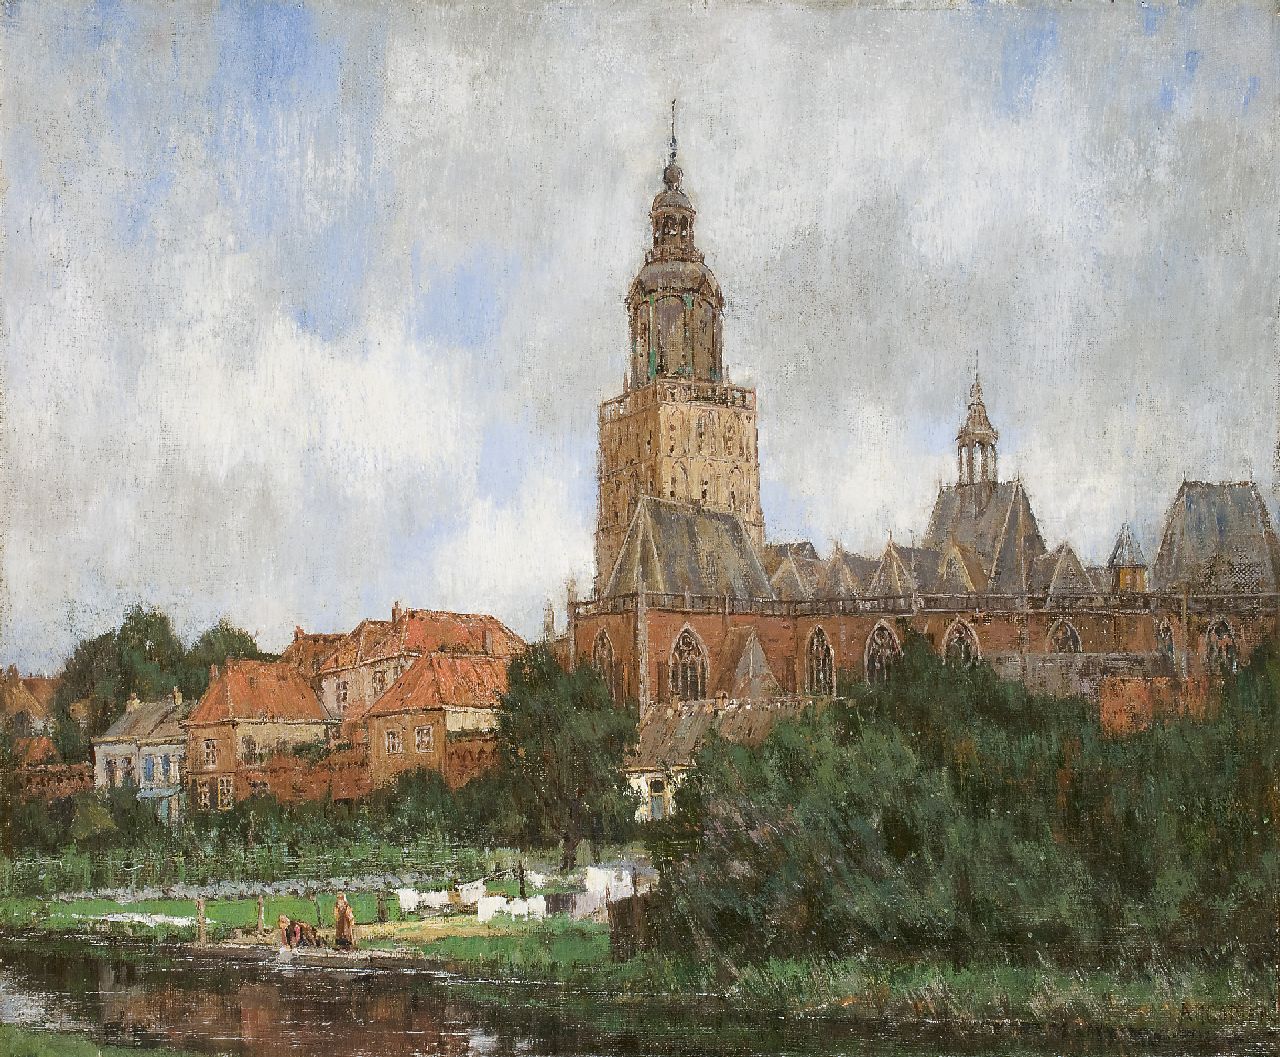 Gorter A.M.  | 'Arnold' Marc Gorter, A view of Zutphen with the Moddergracht and the St. Walburgiskerk, oil on canvas 46.5 x 56.5 cm, signed l.r.